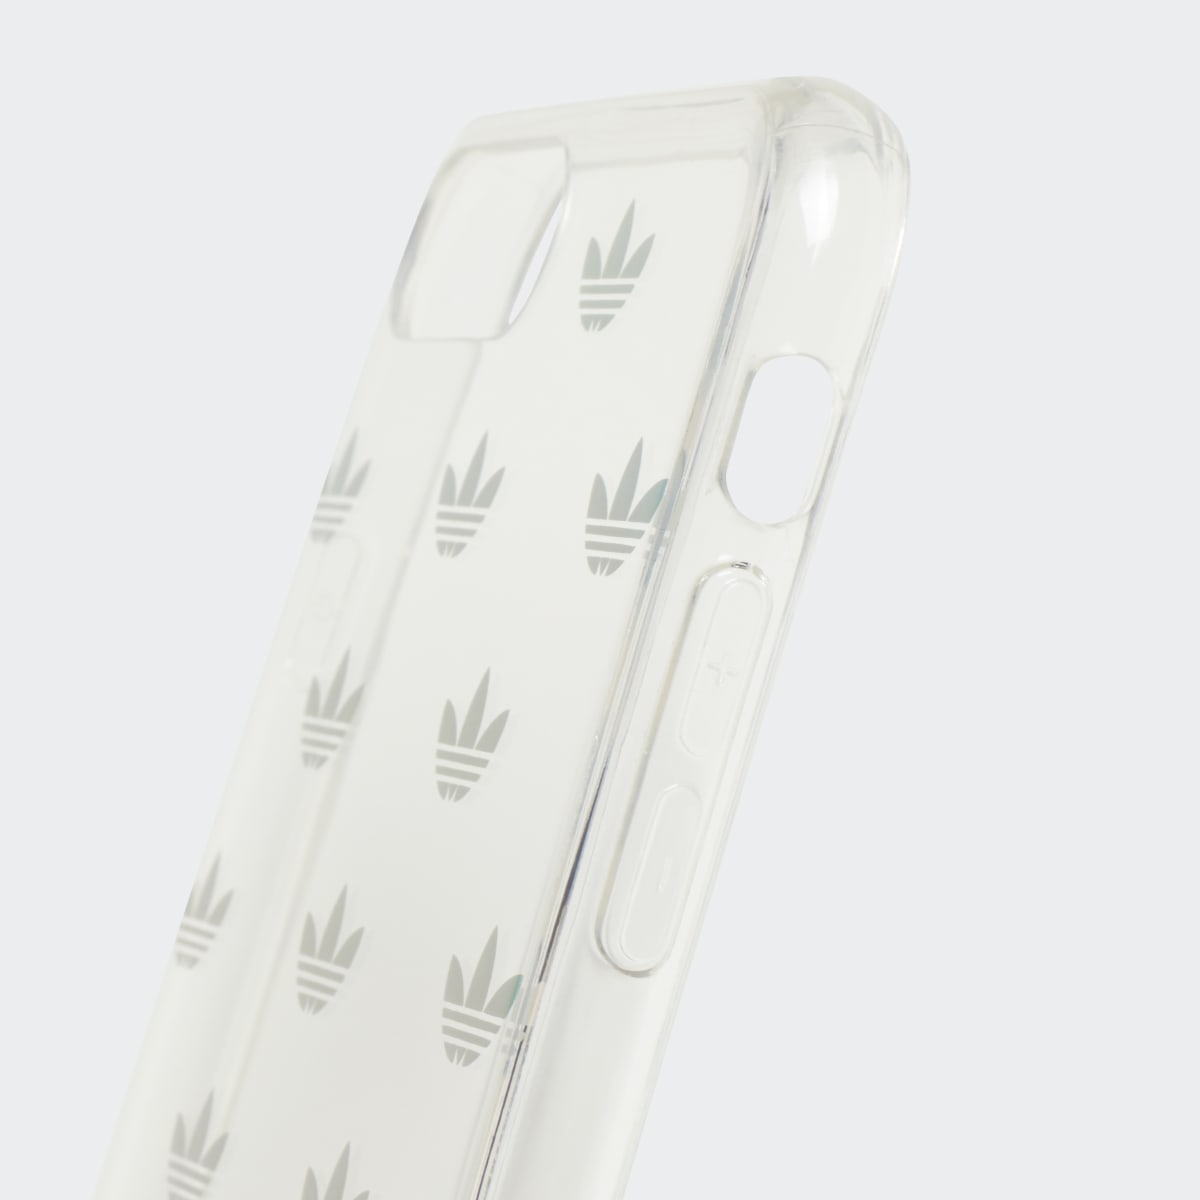 Adidas Clear Case IPhone 8+. 6